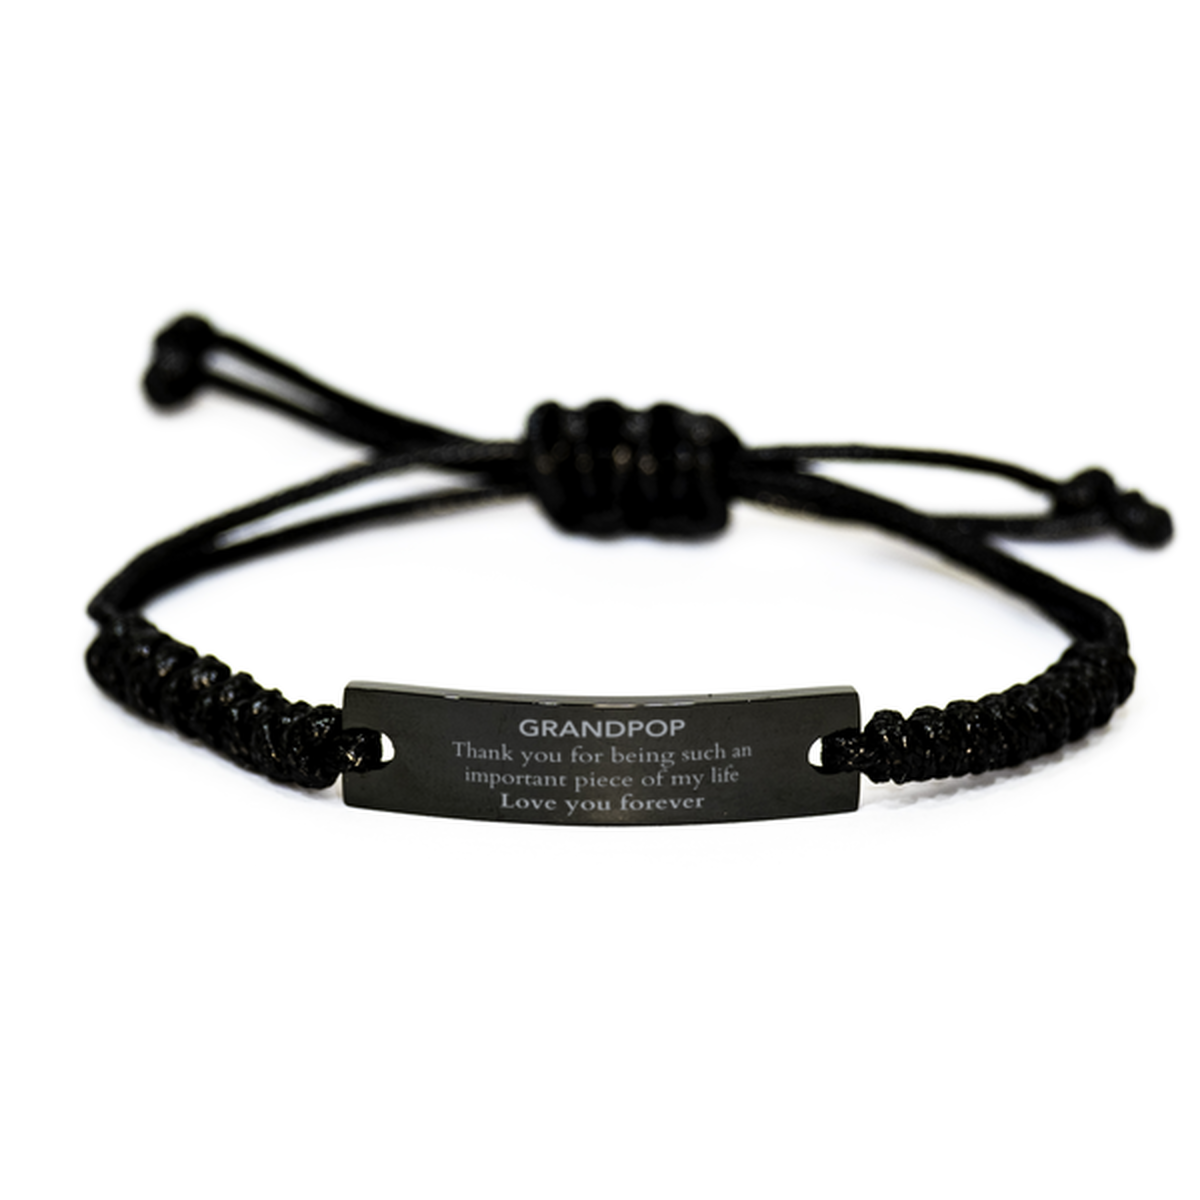 Appropriate Grandpop Black Rope Bracelet Epic Birthday Gifts for Grandpop Thank you for being such an important piece of my life Grandpop Christmas Mothers Fathers Day